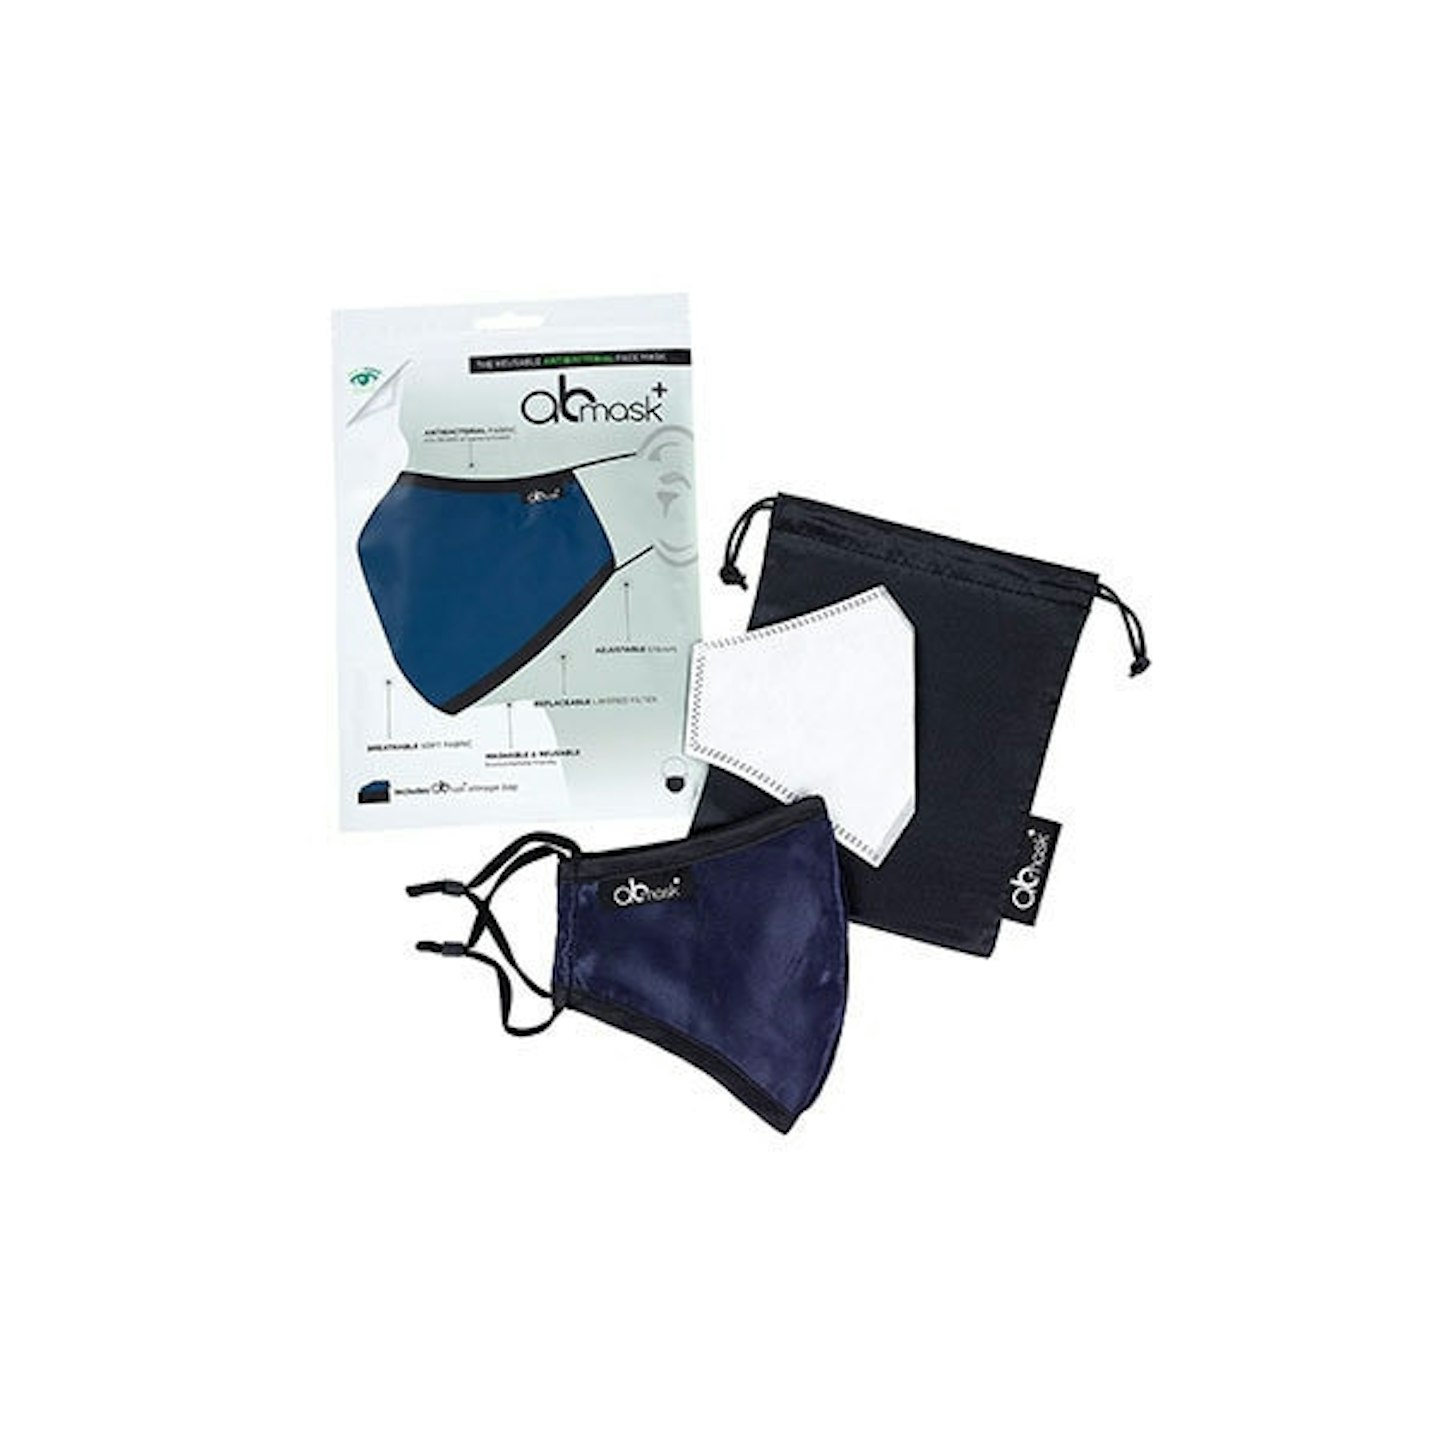 Ab Mask, Reusable Antibacterial Ab Face Mask, 1 mask for £9.99